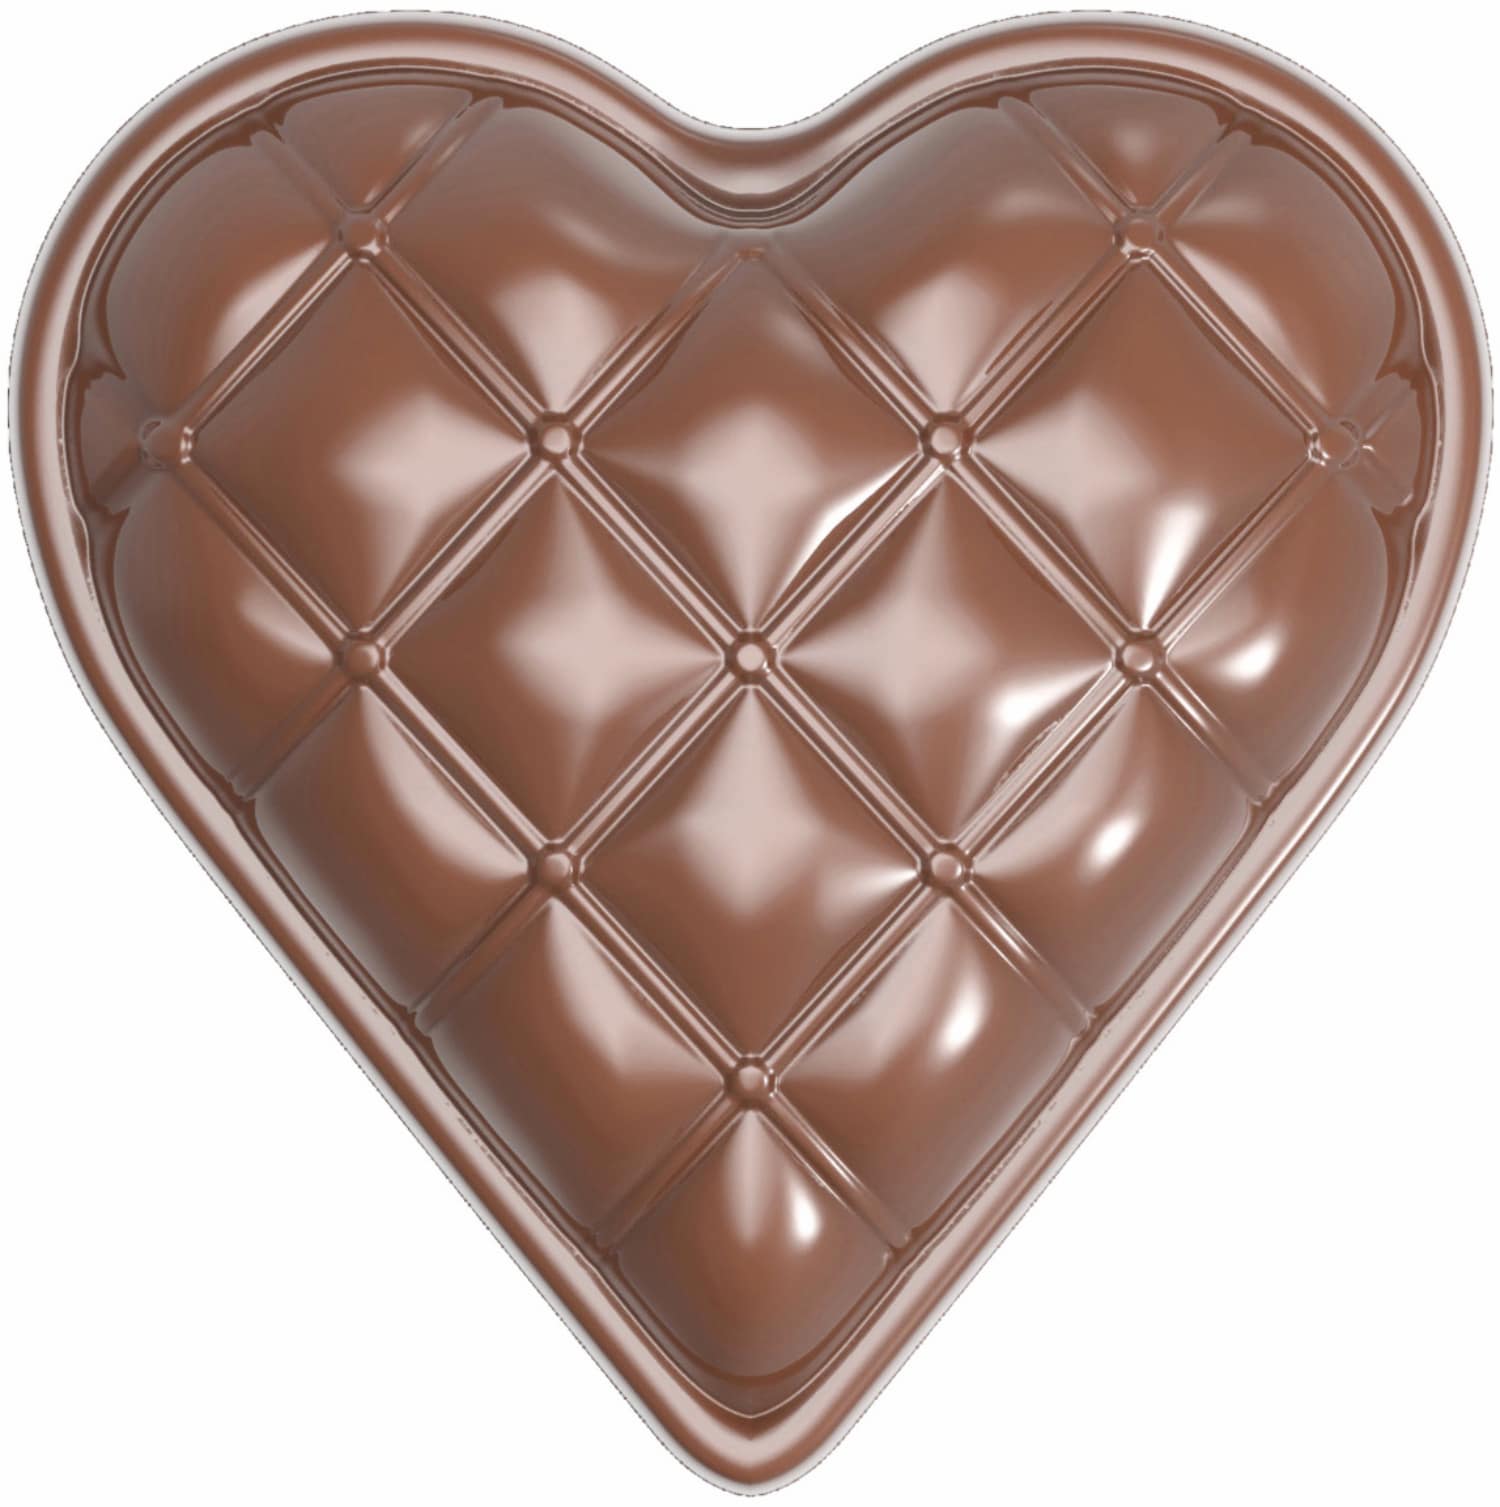 Chocolate mould "heart" 421892